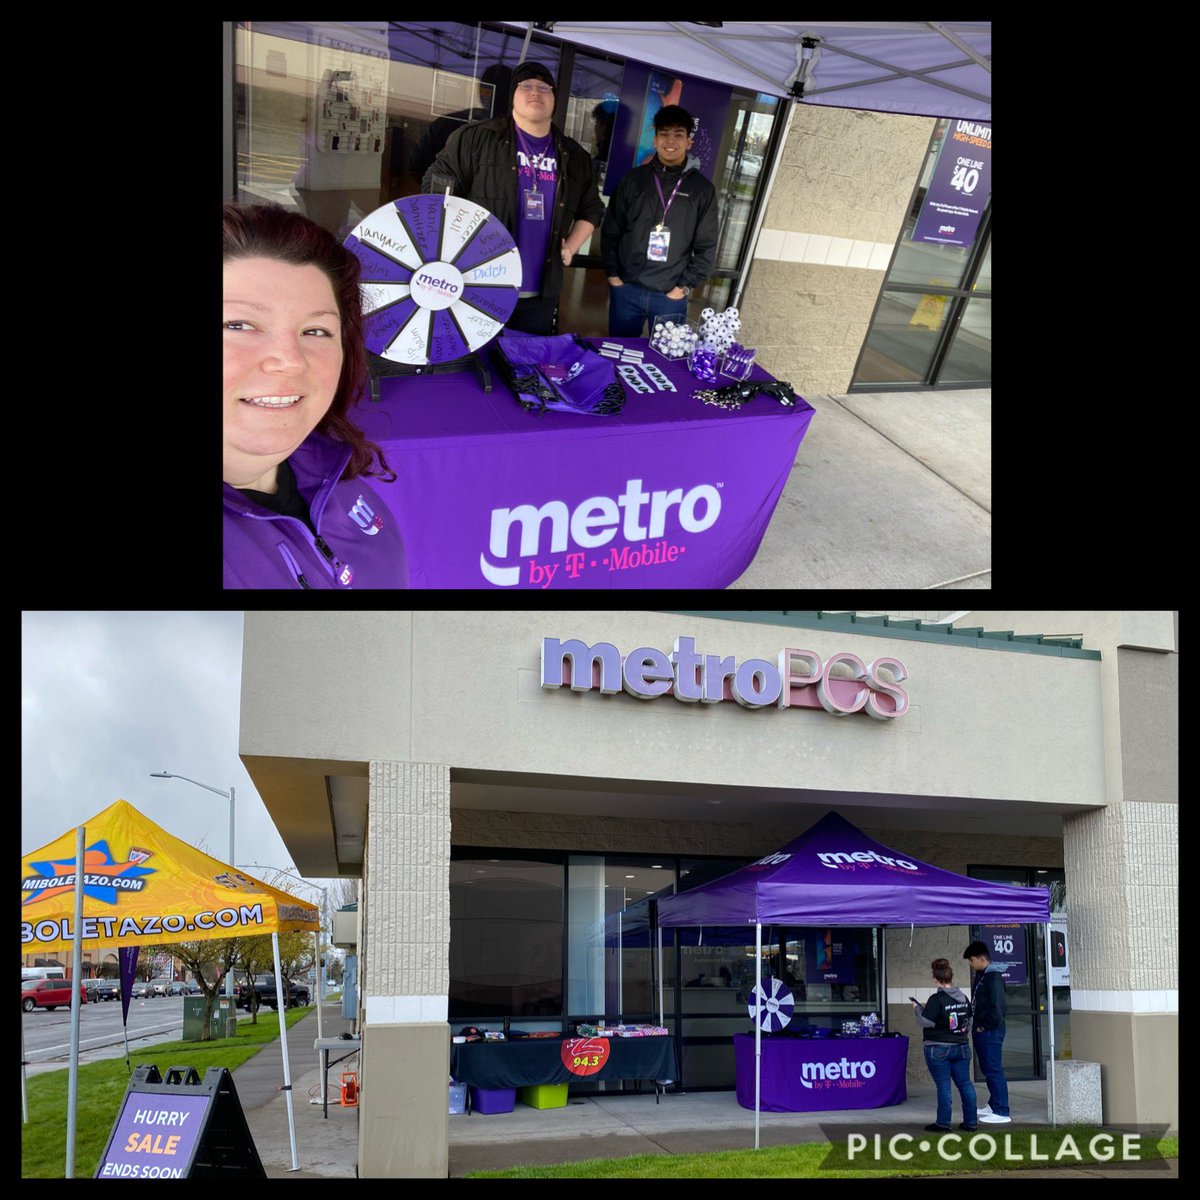 Getting geared up for Prince Royce ticket stop with @Lazeta943! One lucky winner will win the Metro Experience with a limo ride to and from the concert! #PNWSetsTheBar #WestisBest #DSOLife @xtinaellis1 @SteveGerevas @swhitehorse07